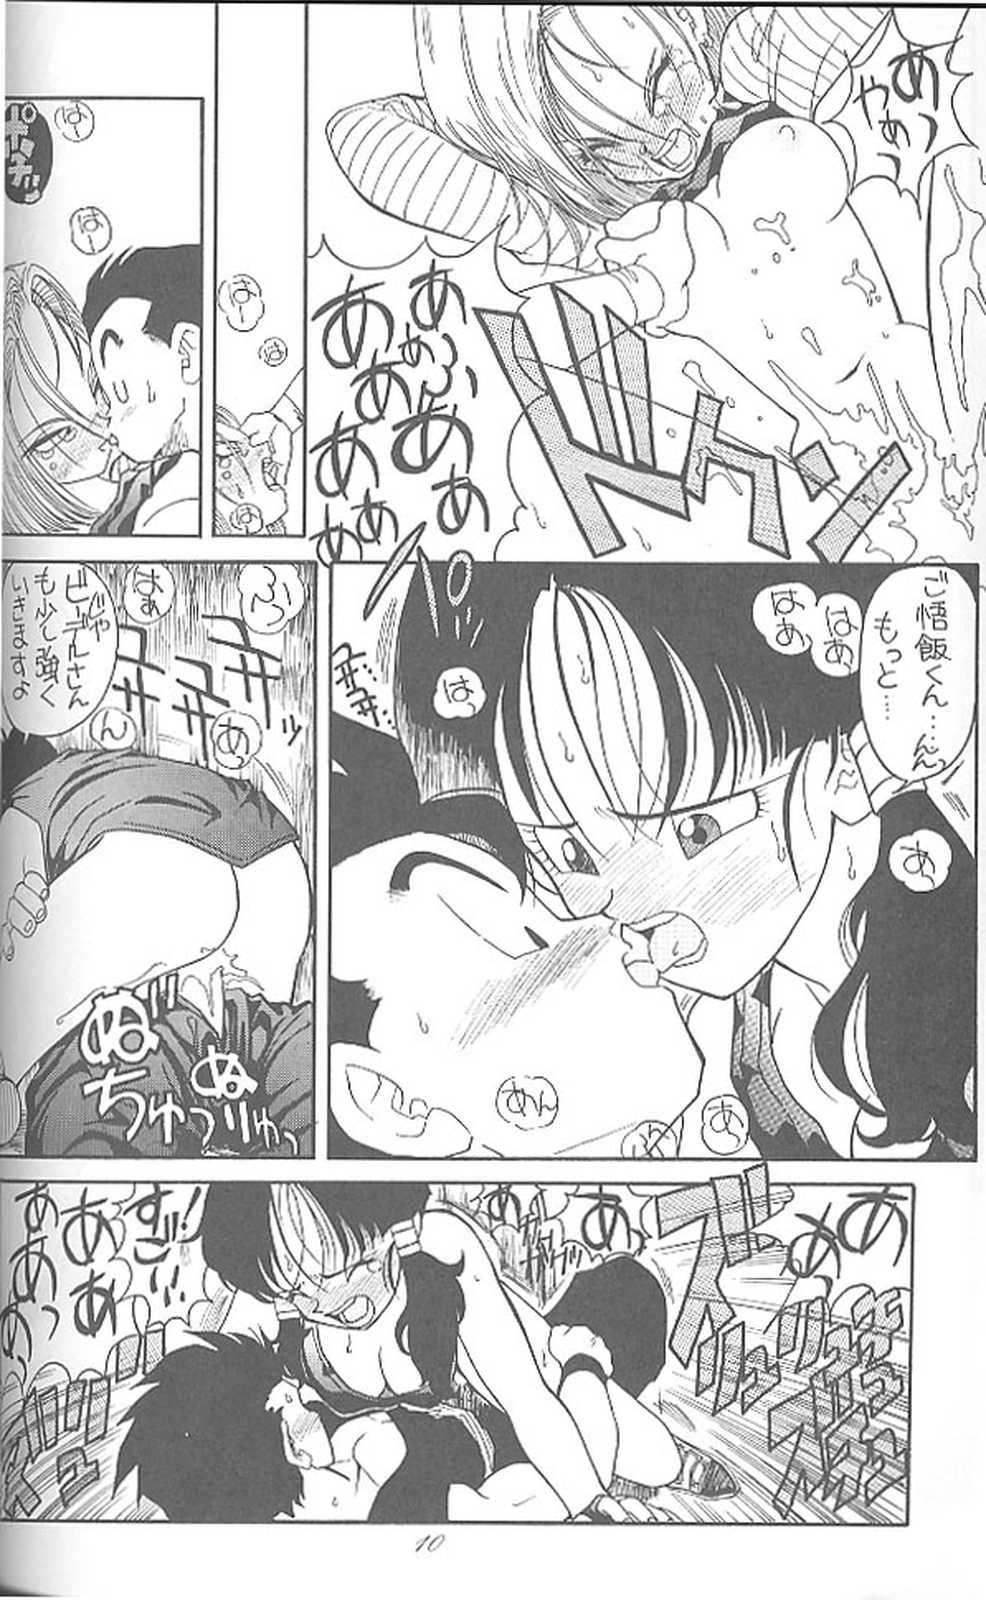 Tributo Haraharatokei vol.4 - Dragon ball z Slayers Dirty pair Ghost sweeper mikami World masterpiece theater Dr. slump Tico of the seven seas Stunning - Page 9